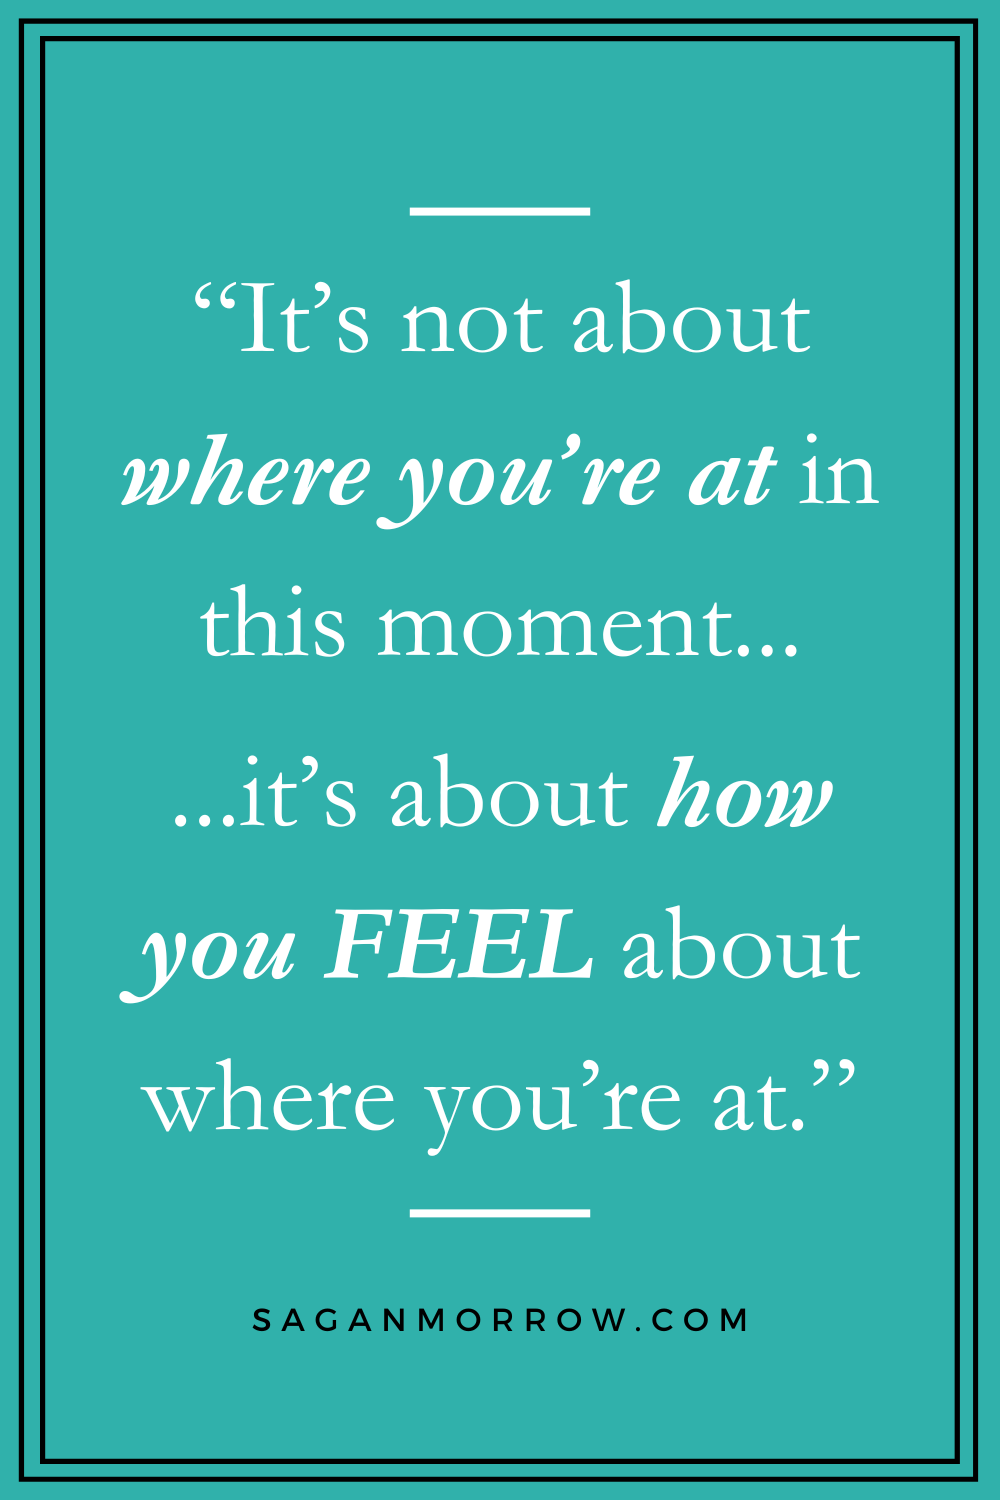 "It's not about where you're at in this moment... it's about how you feel about where you're at." Empowering self care quotes